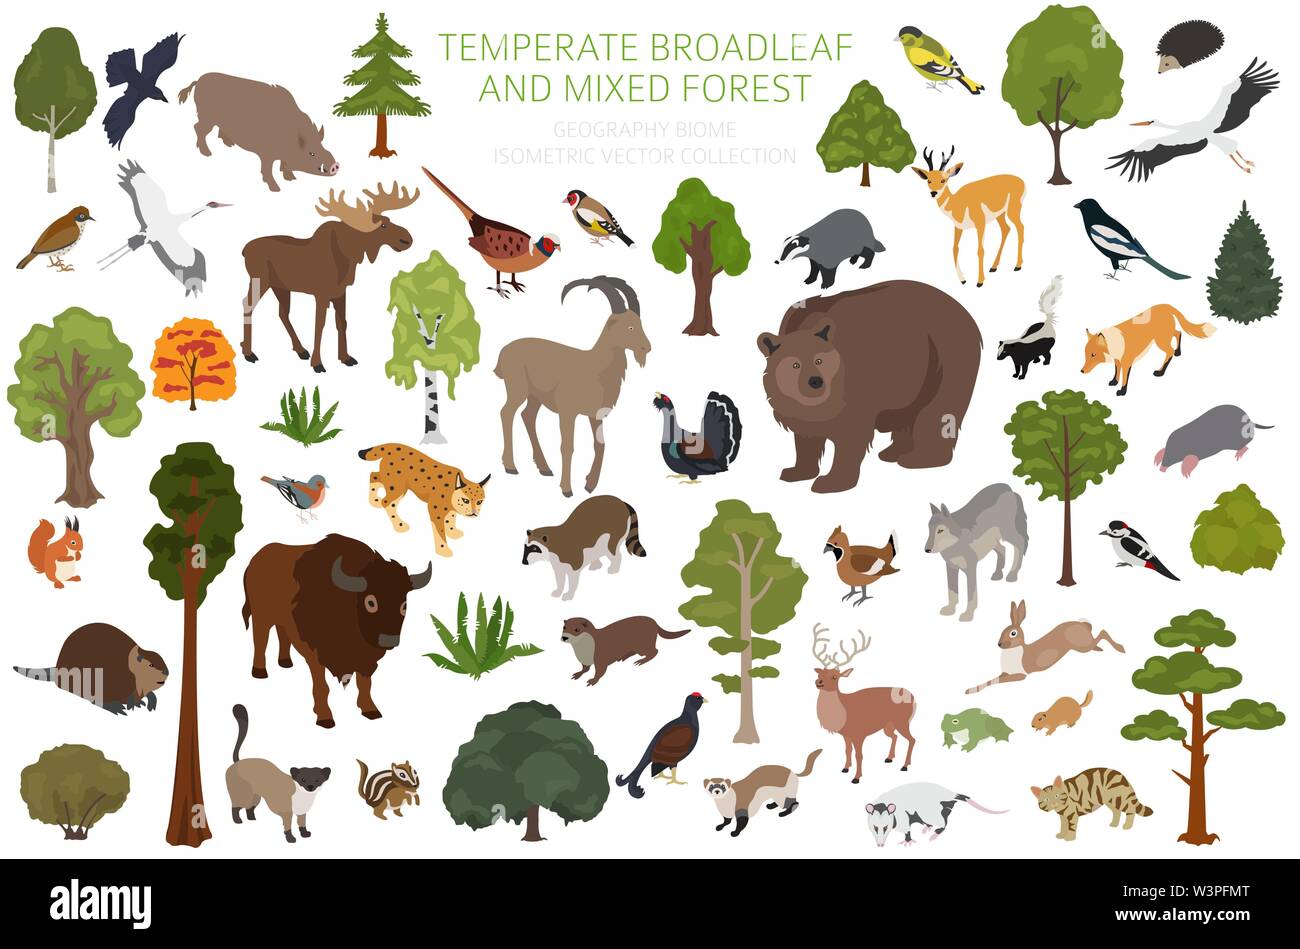 Temperate broadleaf forest and mixed forest biome. Terrestrial ecosystem  world map. Animals, birds and plants set. 3d isometric graphic design.  Vector Stock Vector Image & Art - Alamy